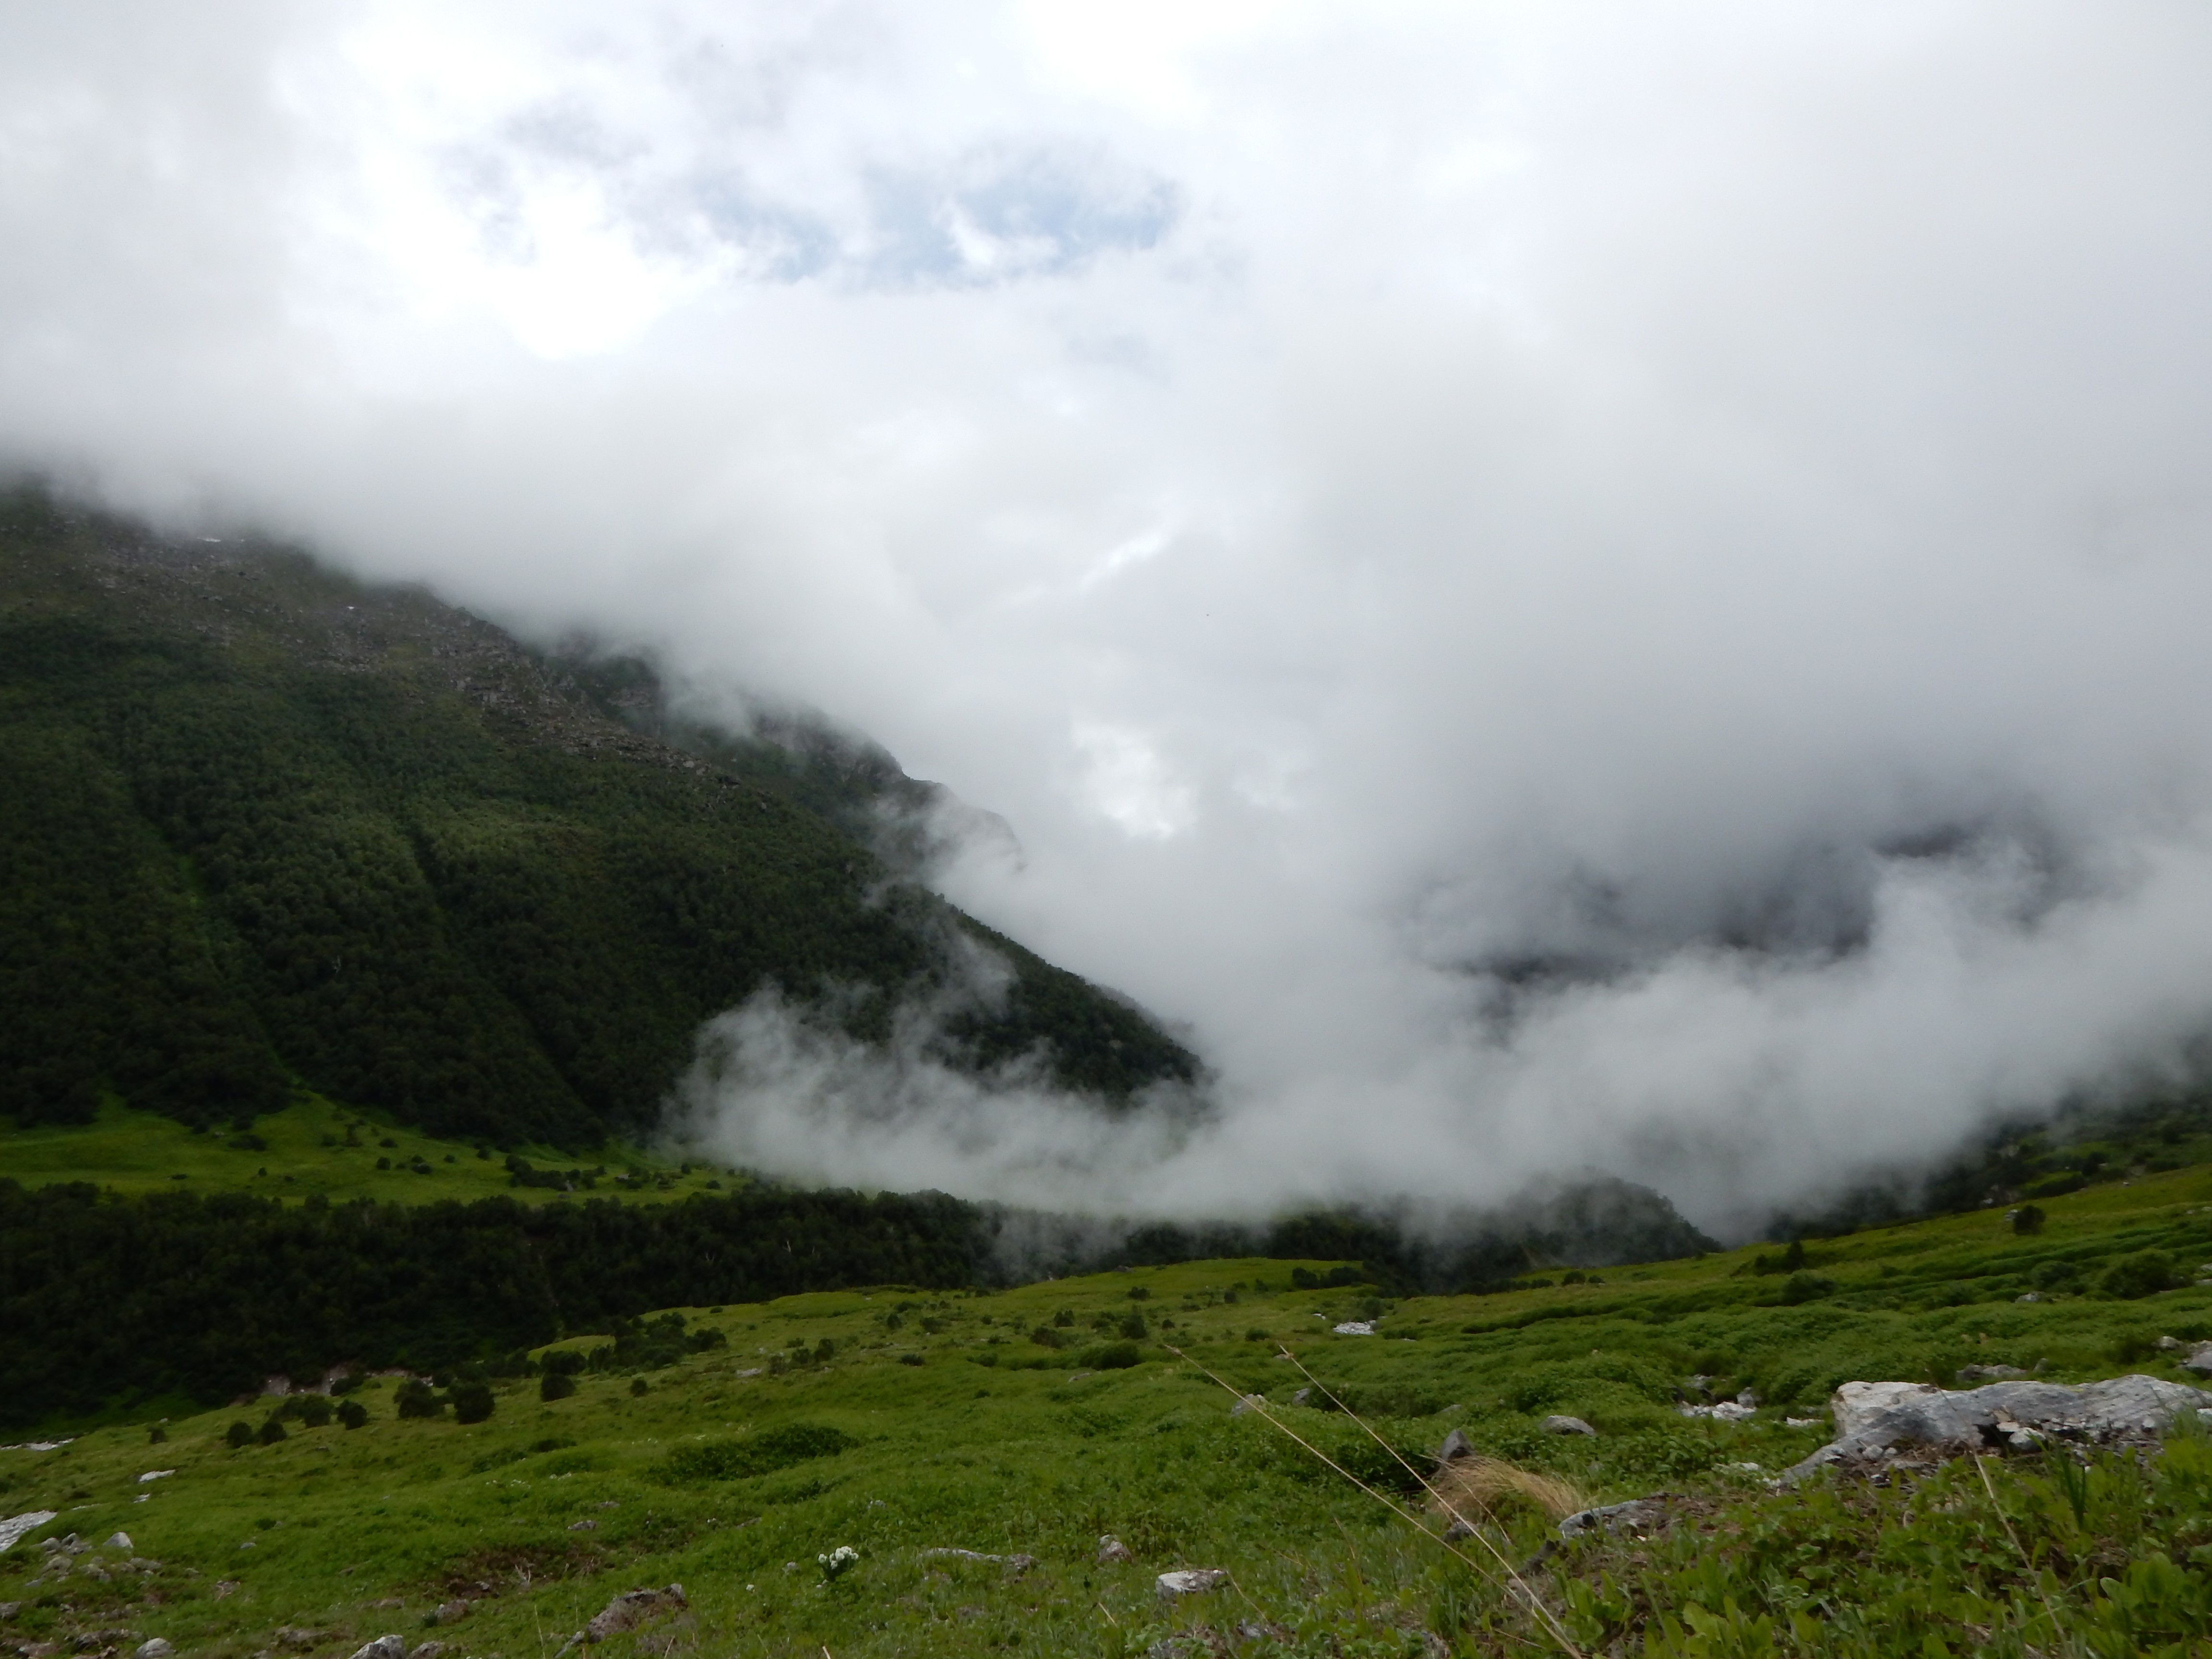 General 4608x3456 clouds valley Himalayas nature landscape